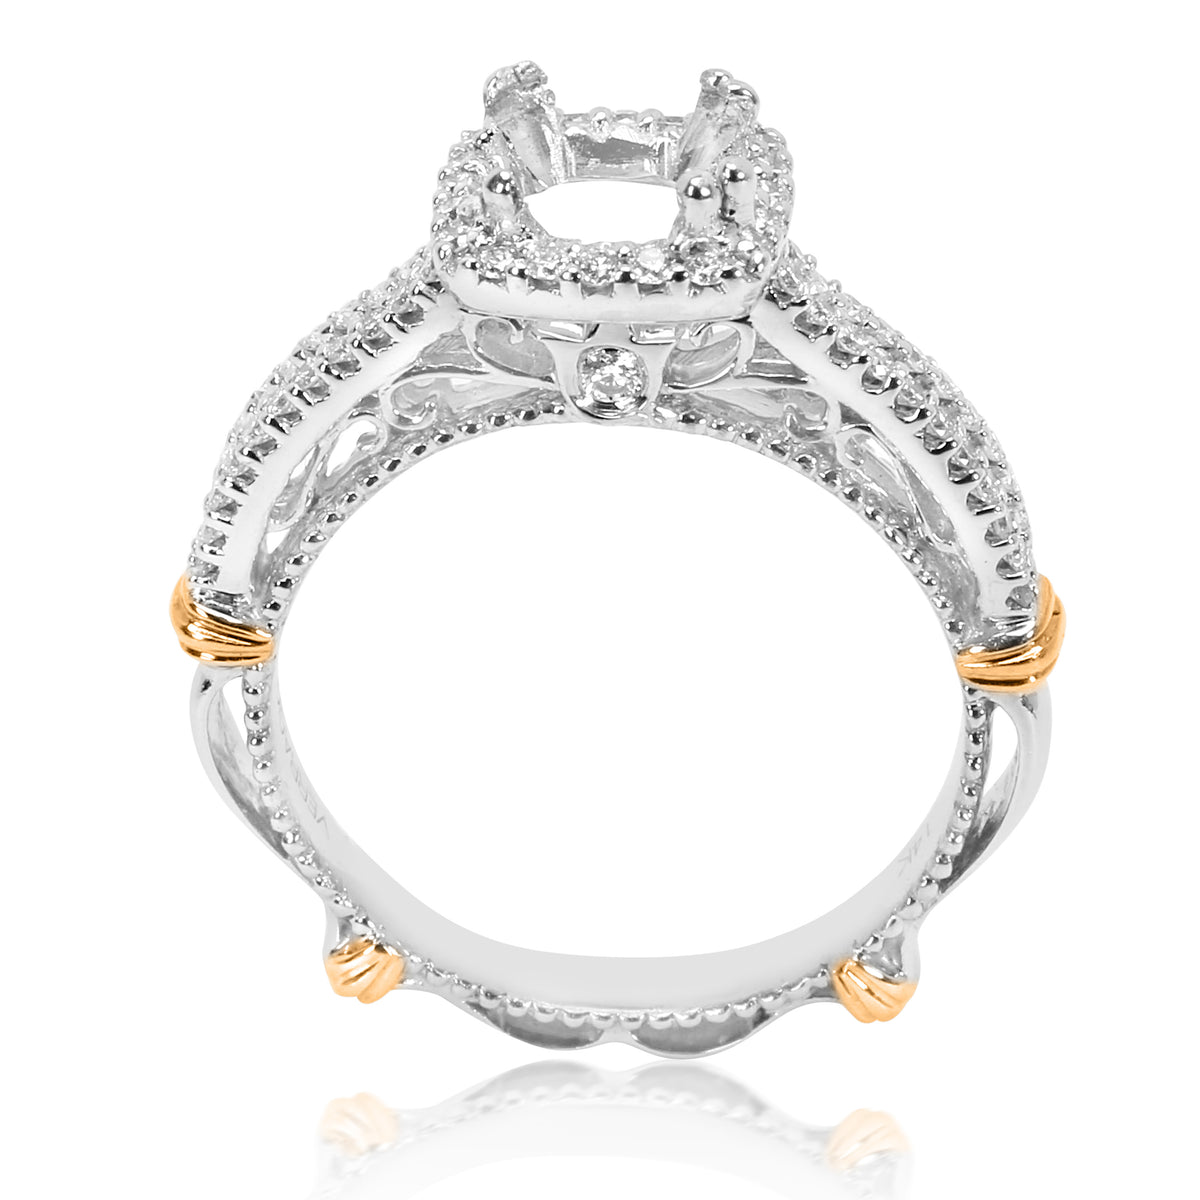 Verragio Diamond Engagement Ring Setting for a Cushion Center in 18K White Gold